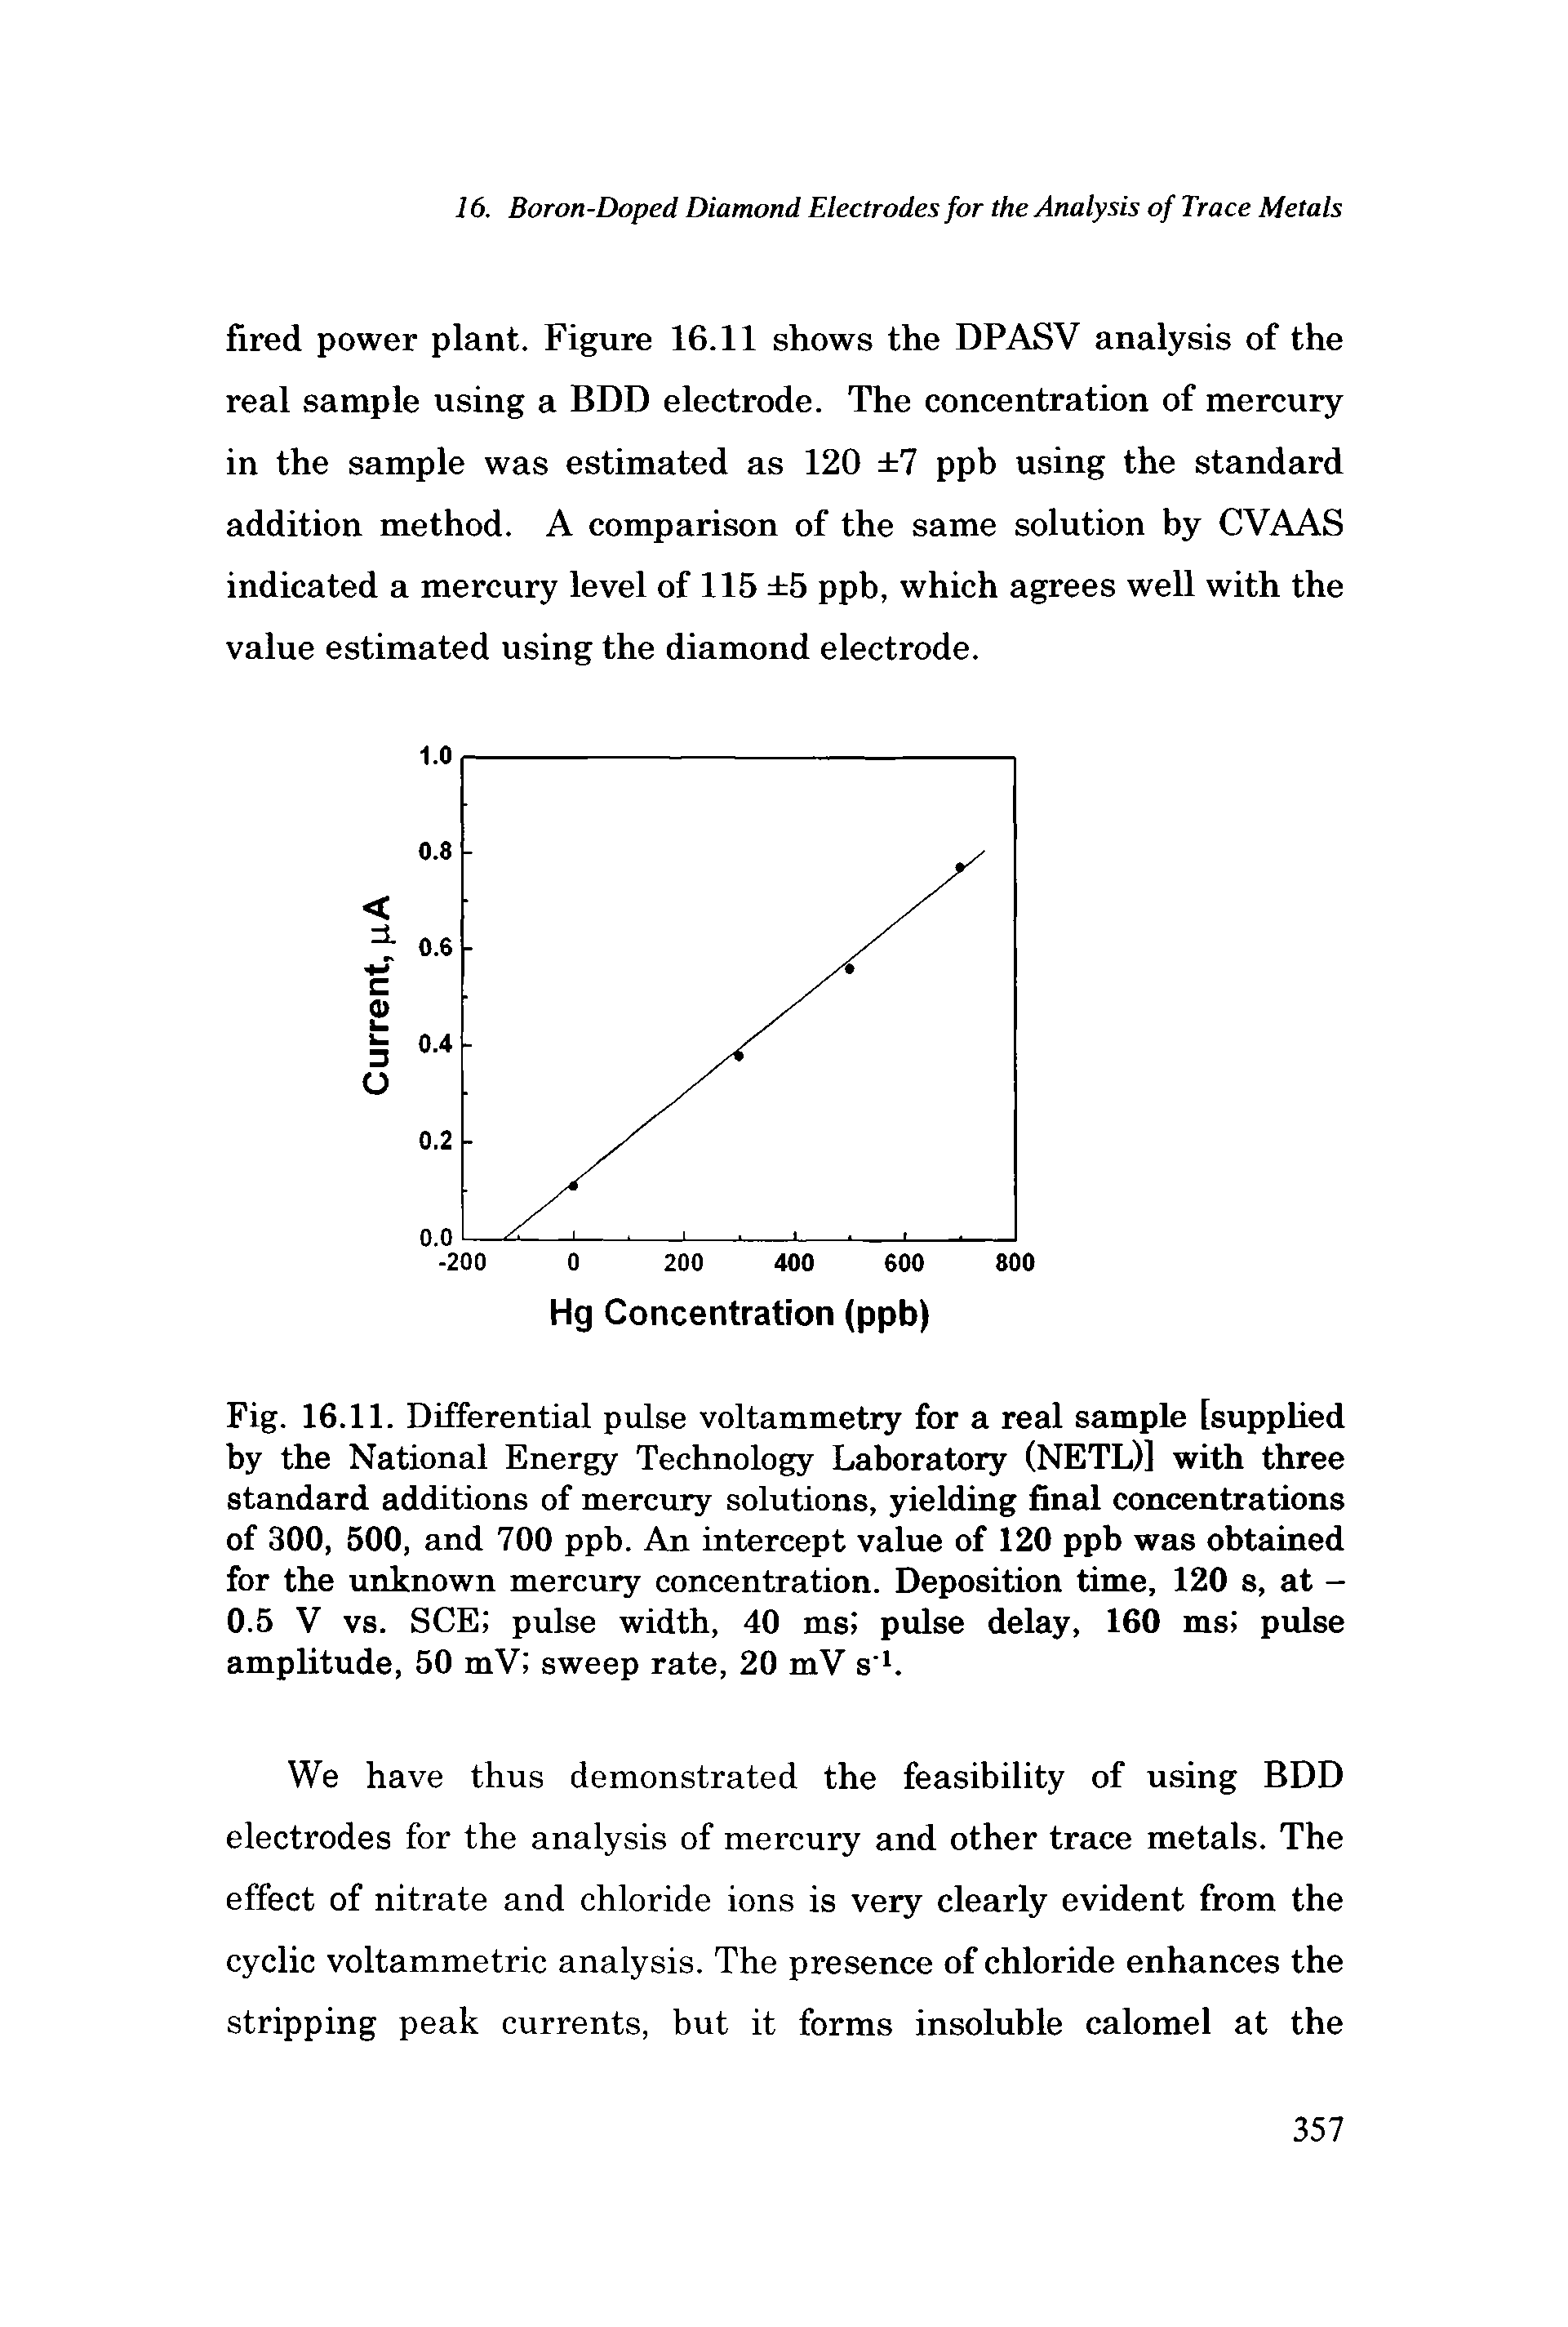 Fig. 16.11. Differential pulse voltammetry for a real sample [supplied by the National Energy Technology Laboratory (NETL)] with three standard additions of mercury solutions, yielding final concentrations of 300, 500, and 700 ppb. An intercept value of 120 ppb was obtained for the unknown mercury concentration. Deposition time, 120 s, at -0.5 V vs. SCE pulse width, 40 msJ pulse delay, 160 ms pulse amplitude, 50 mV sweep rate, 20 mV s. ...